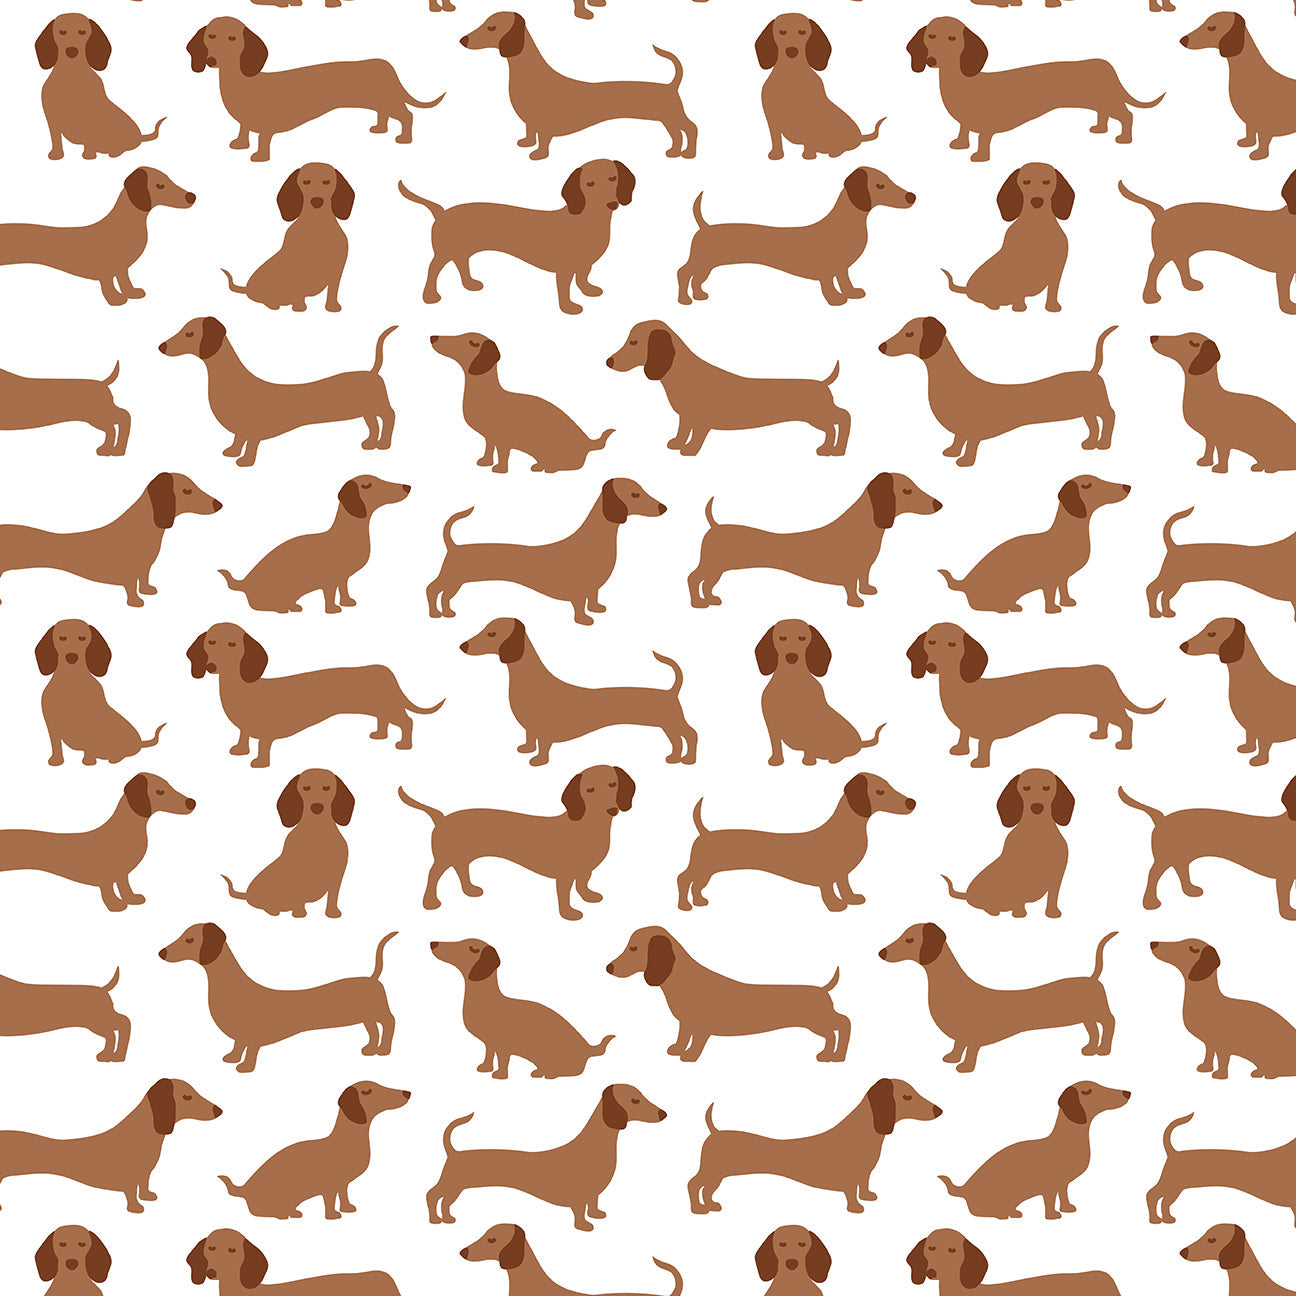 Bloomers - Dachshunds Brown